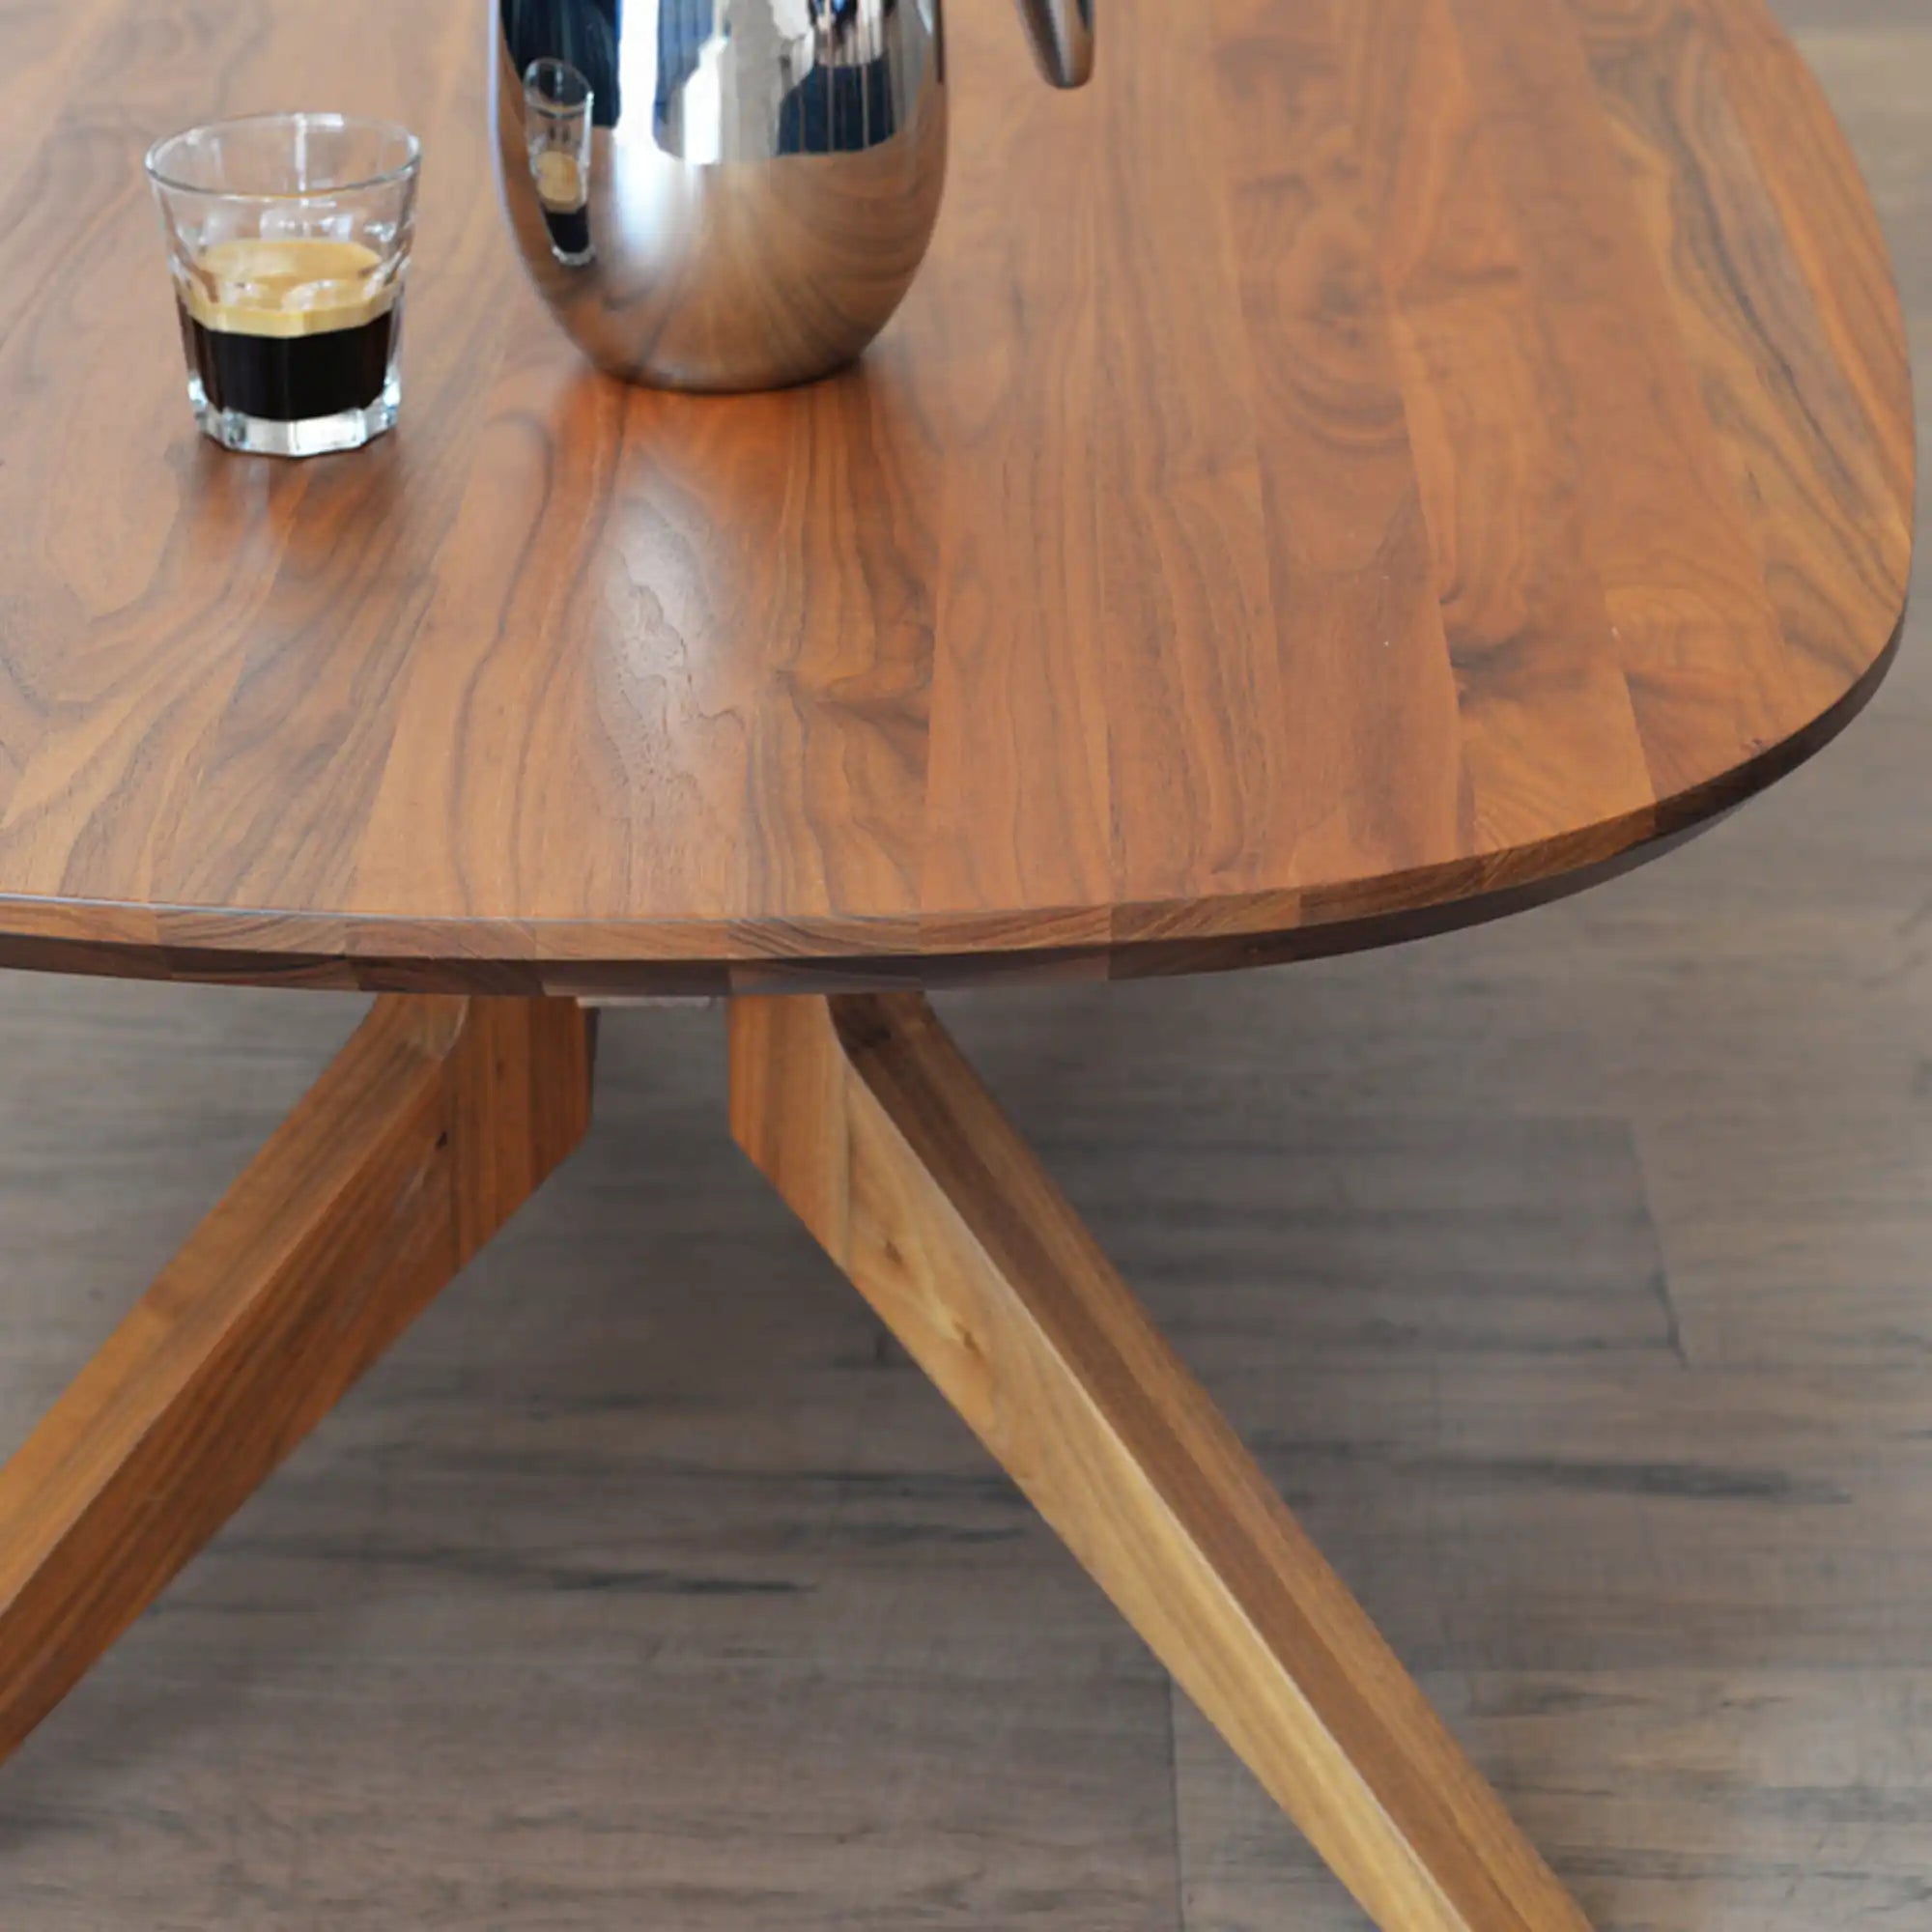 Cross Oval Coffee Table - THAT COOL LIVING